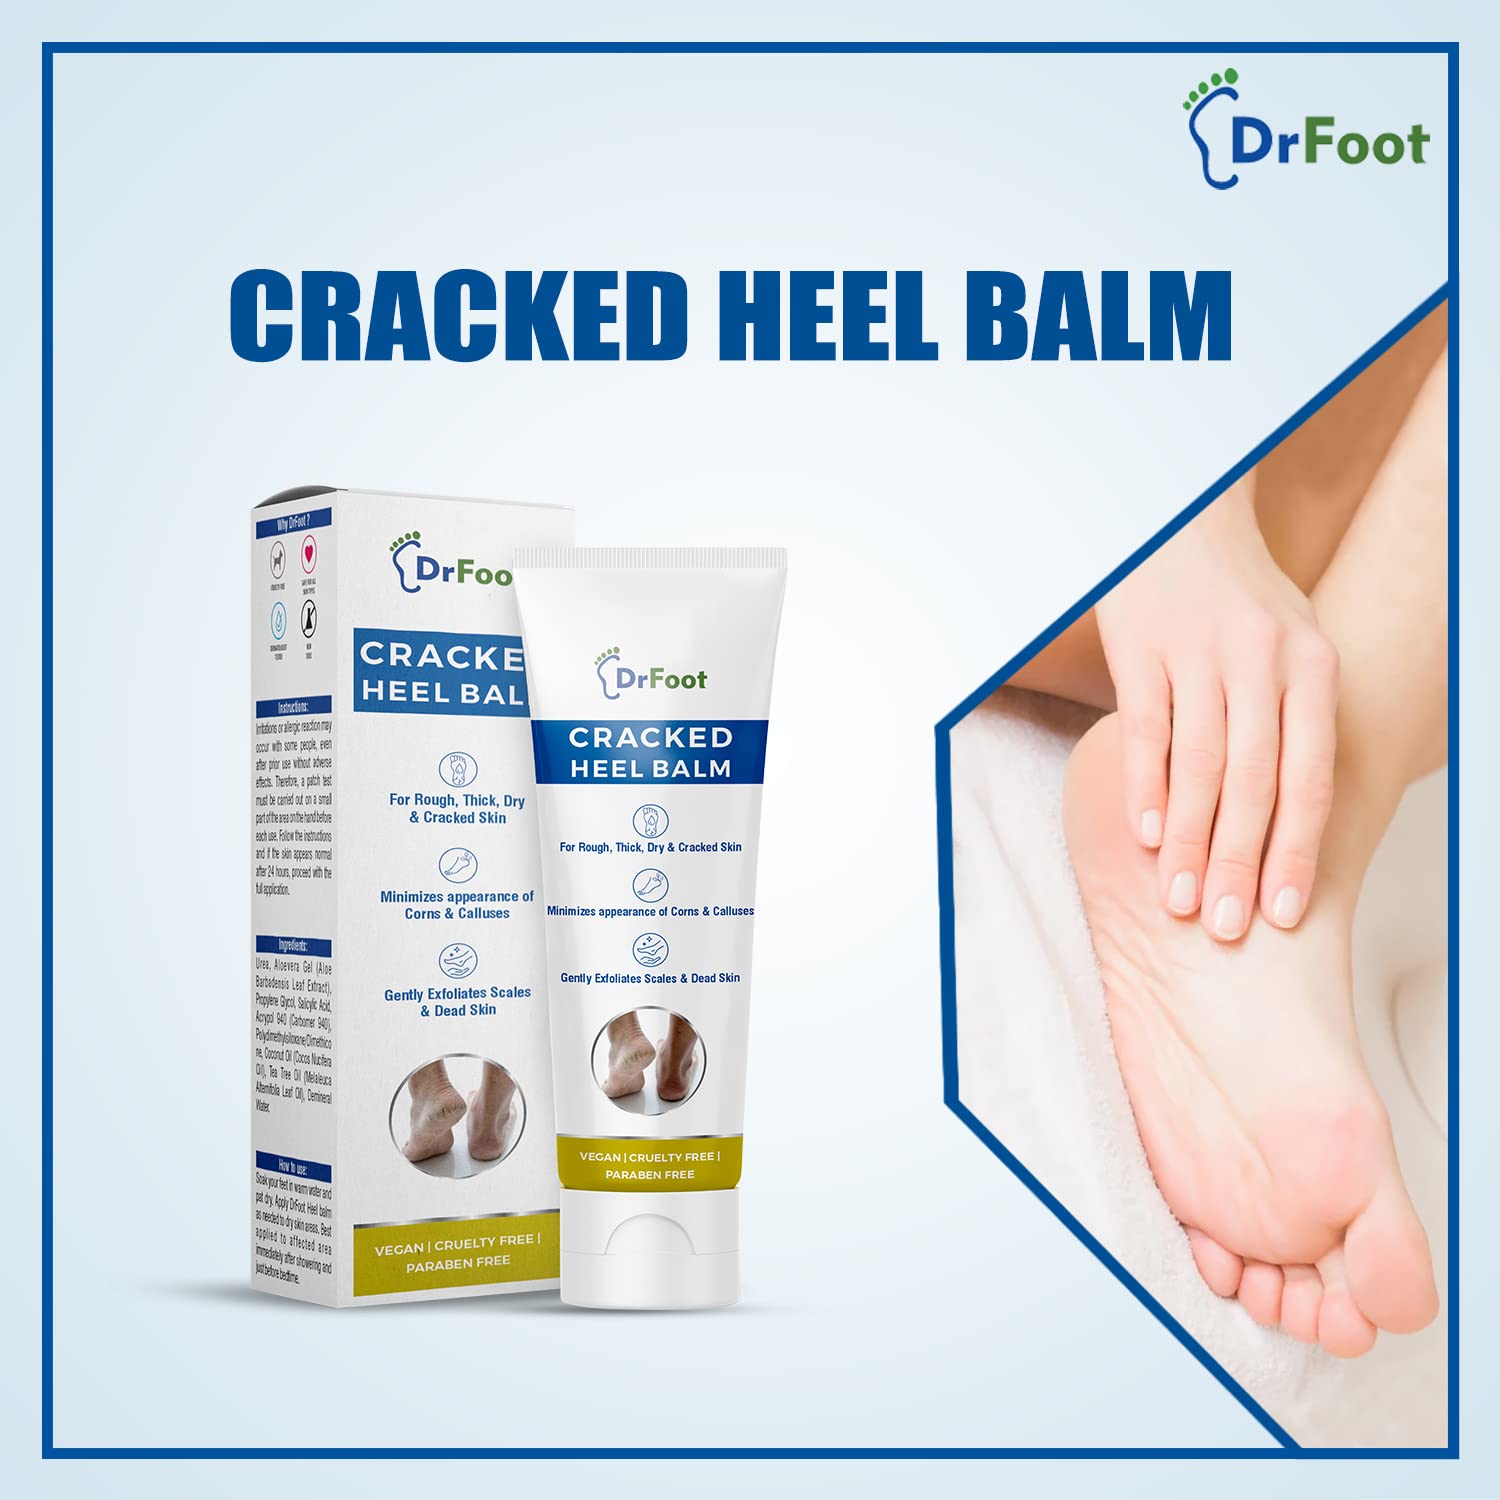 Dr Foot Cracked Heel Balm with Urea, Aloe Vera Gel & Tea Tree Oil for Rough, Thick, Dry, Cracked Skin | Cure and Moisturizes for Healthy Feet – 50gm (Pack of 3)